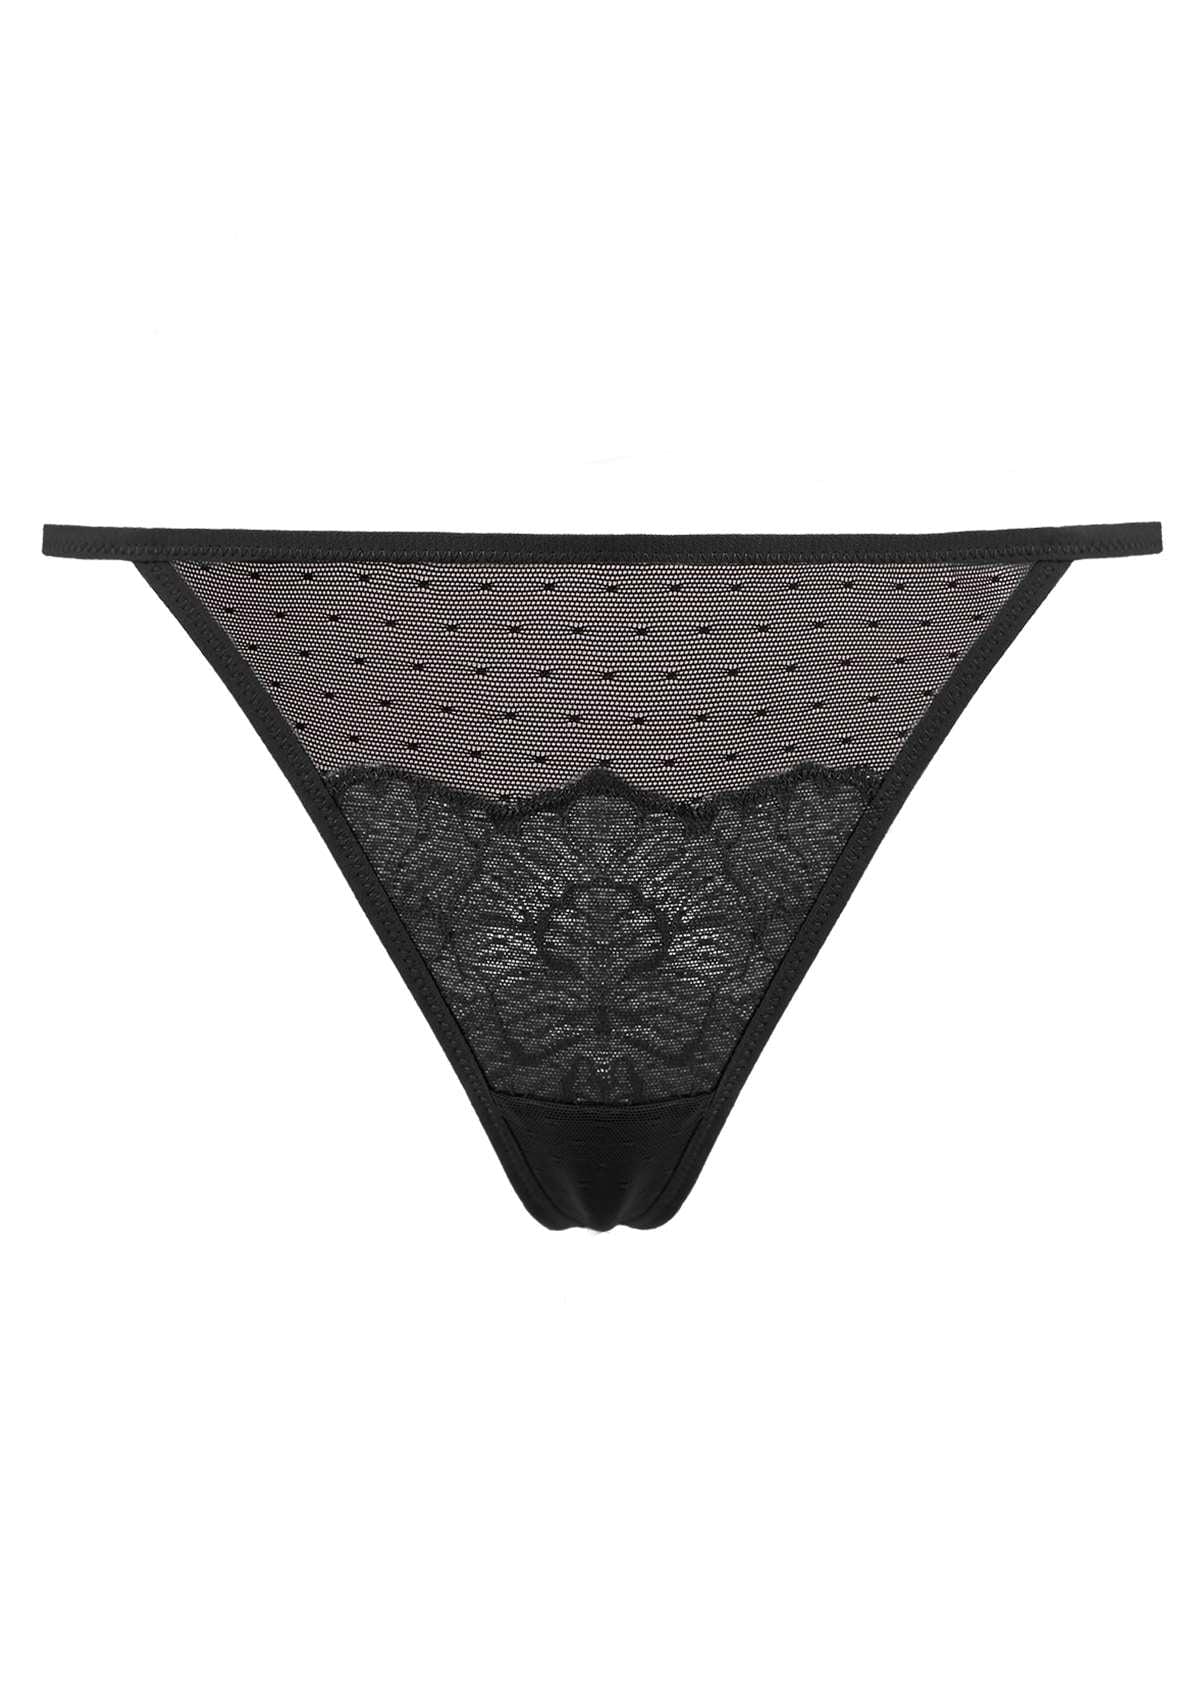 HSIA Blossom Floral Lace Mesh Cheeky Sexy String Thongs - 3 Pack - XL / Storm Blue+Dark Pink+Black